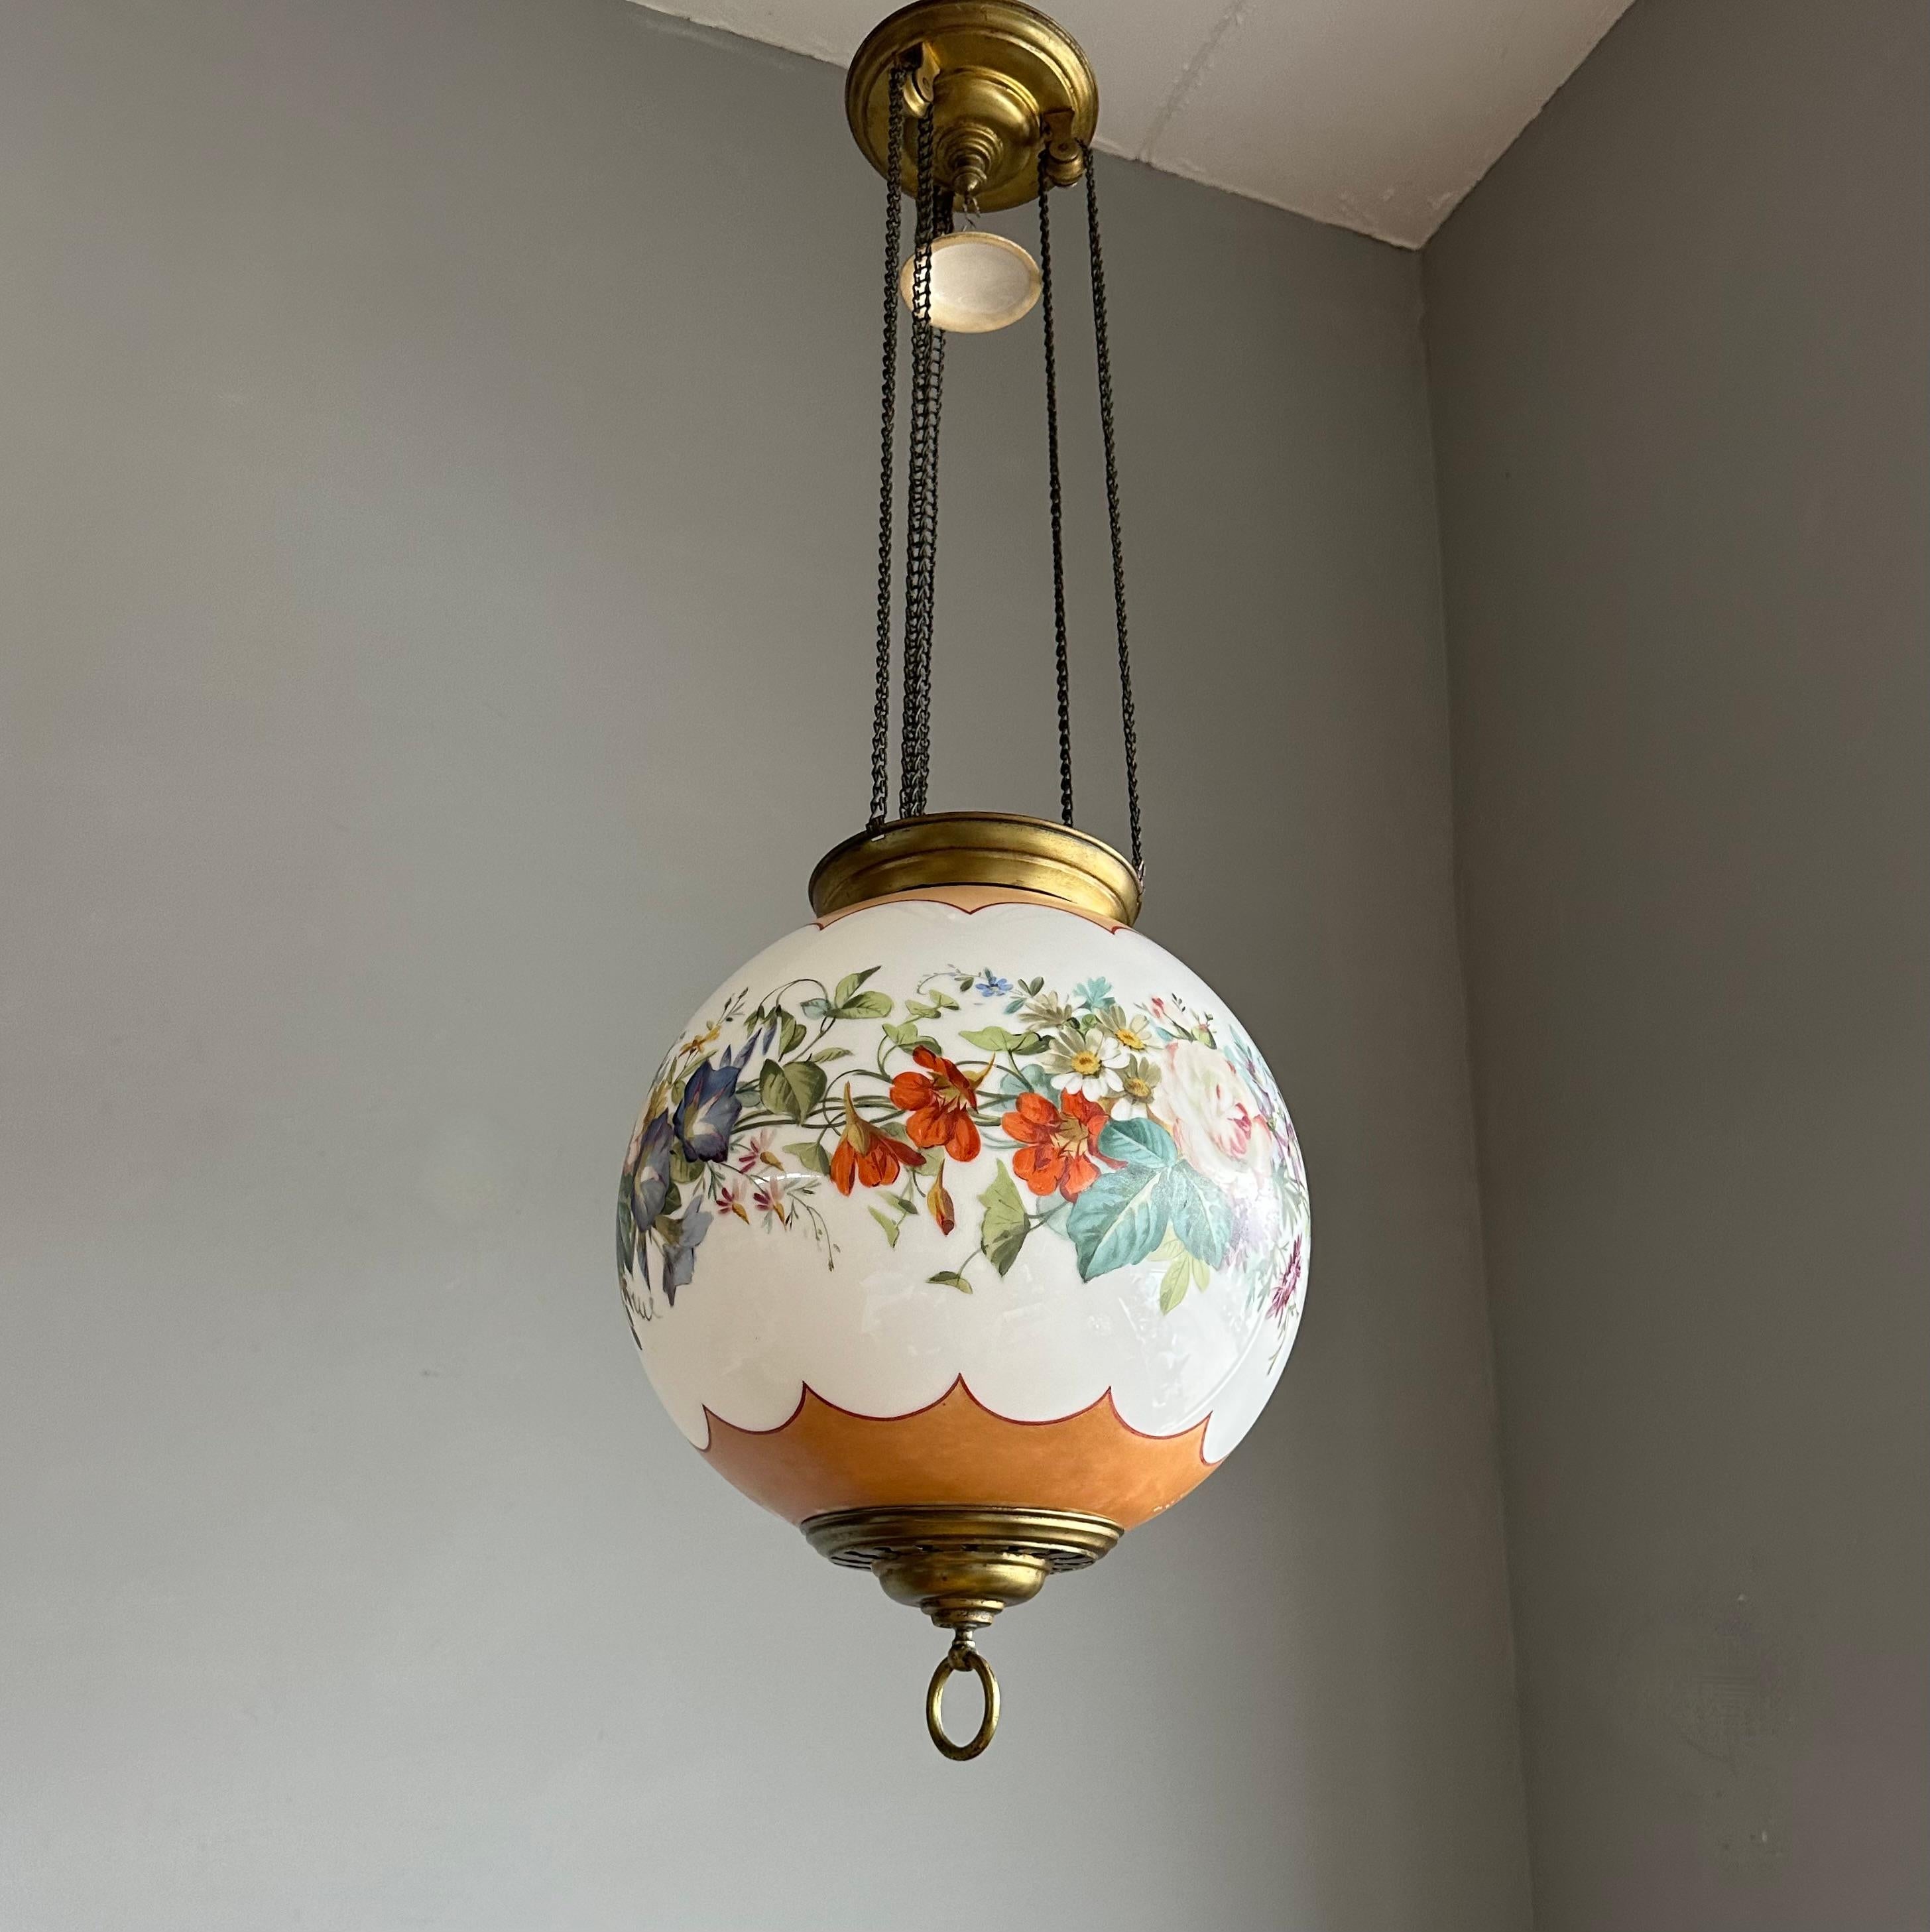 Antique Round Opaline Glass Shade Pendant Light with Wreath of Flowers Decor For Sale 3